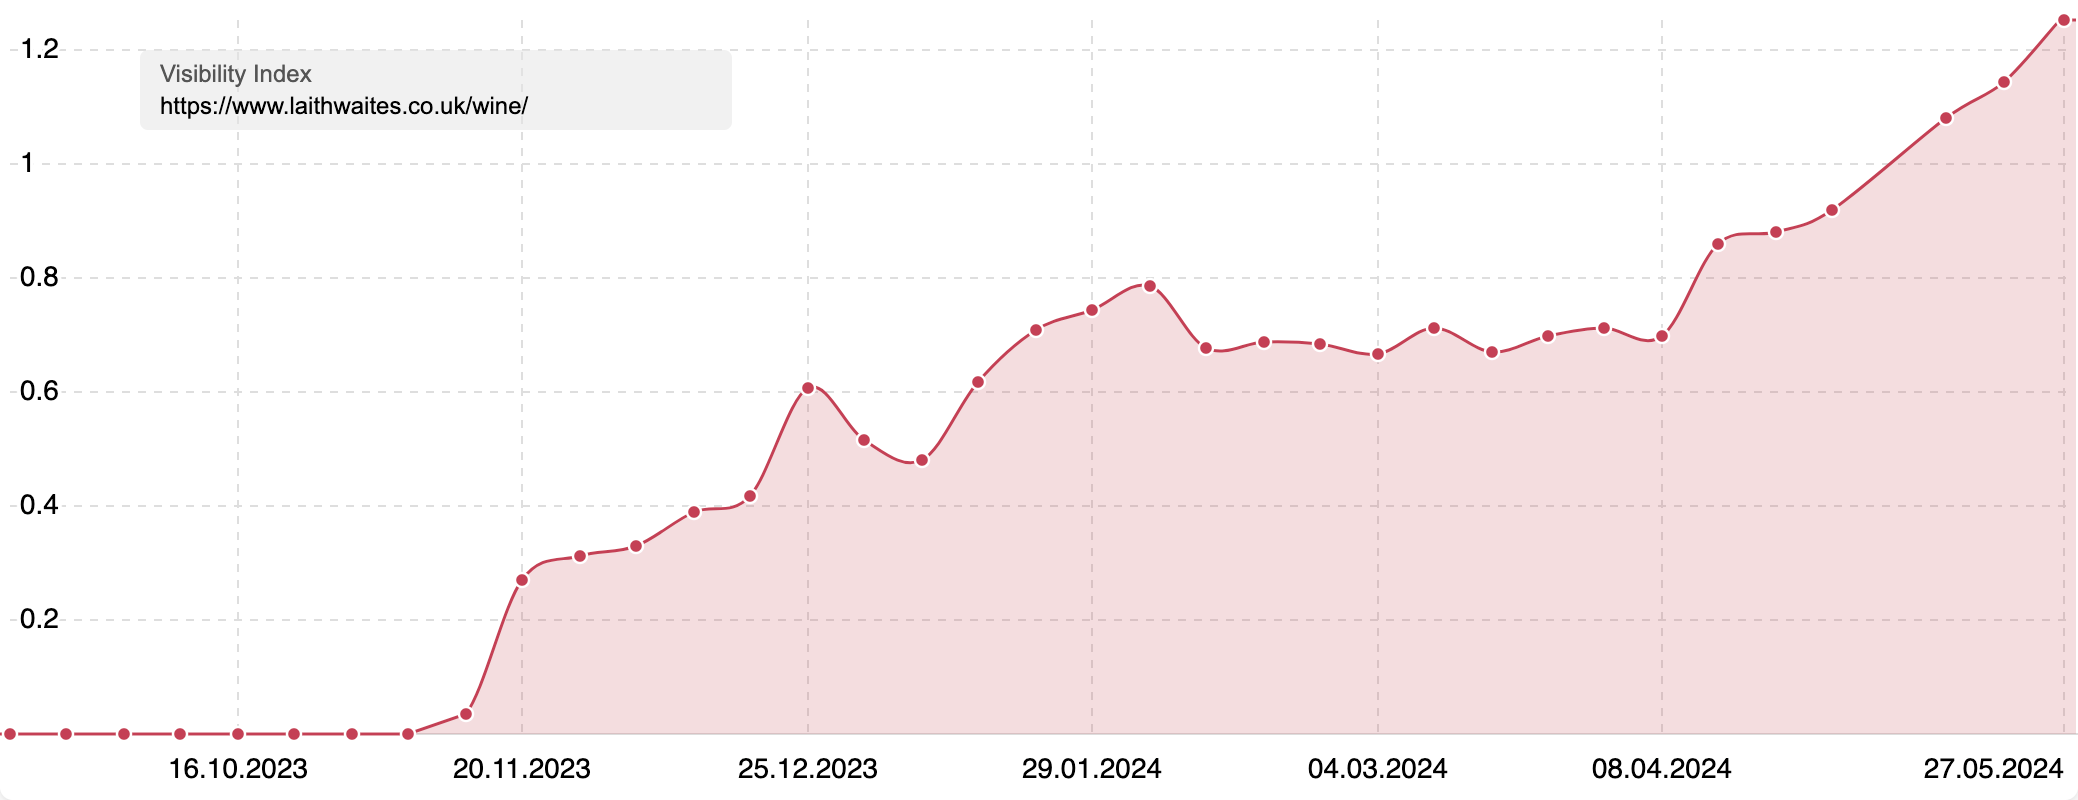 Laithwaites' Visibility Index since 2023, showing a steady growth.